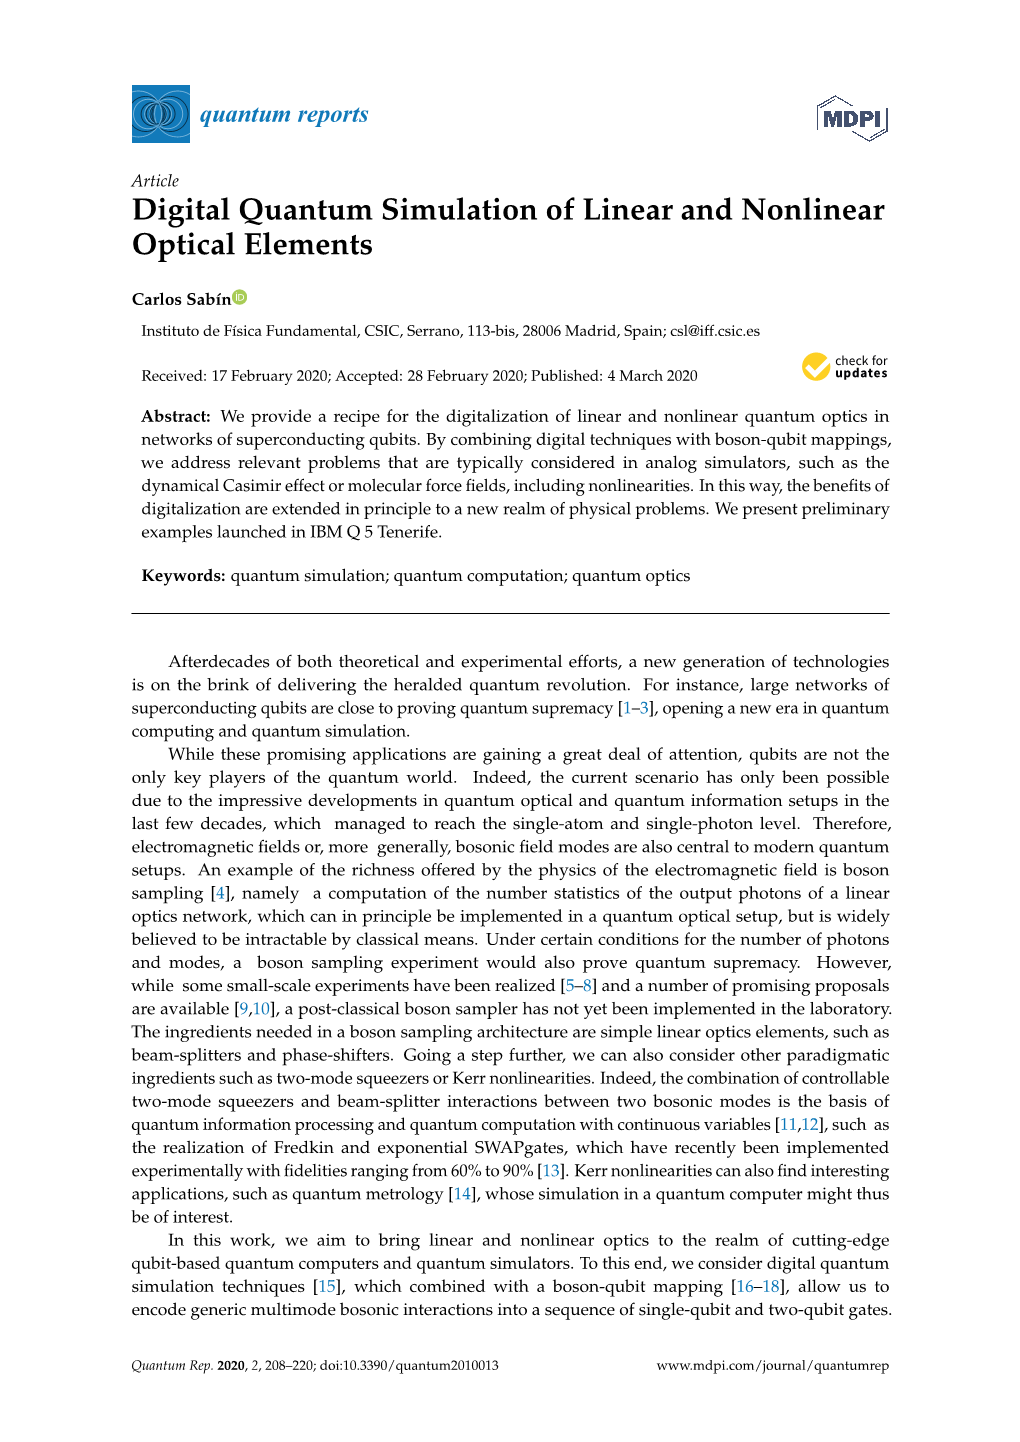 Digital Quantum Simulation of Linear and Nonlinear Optical Elements